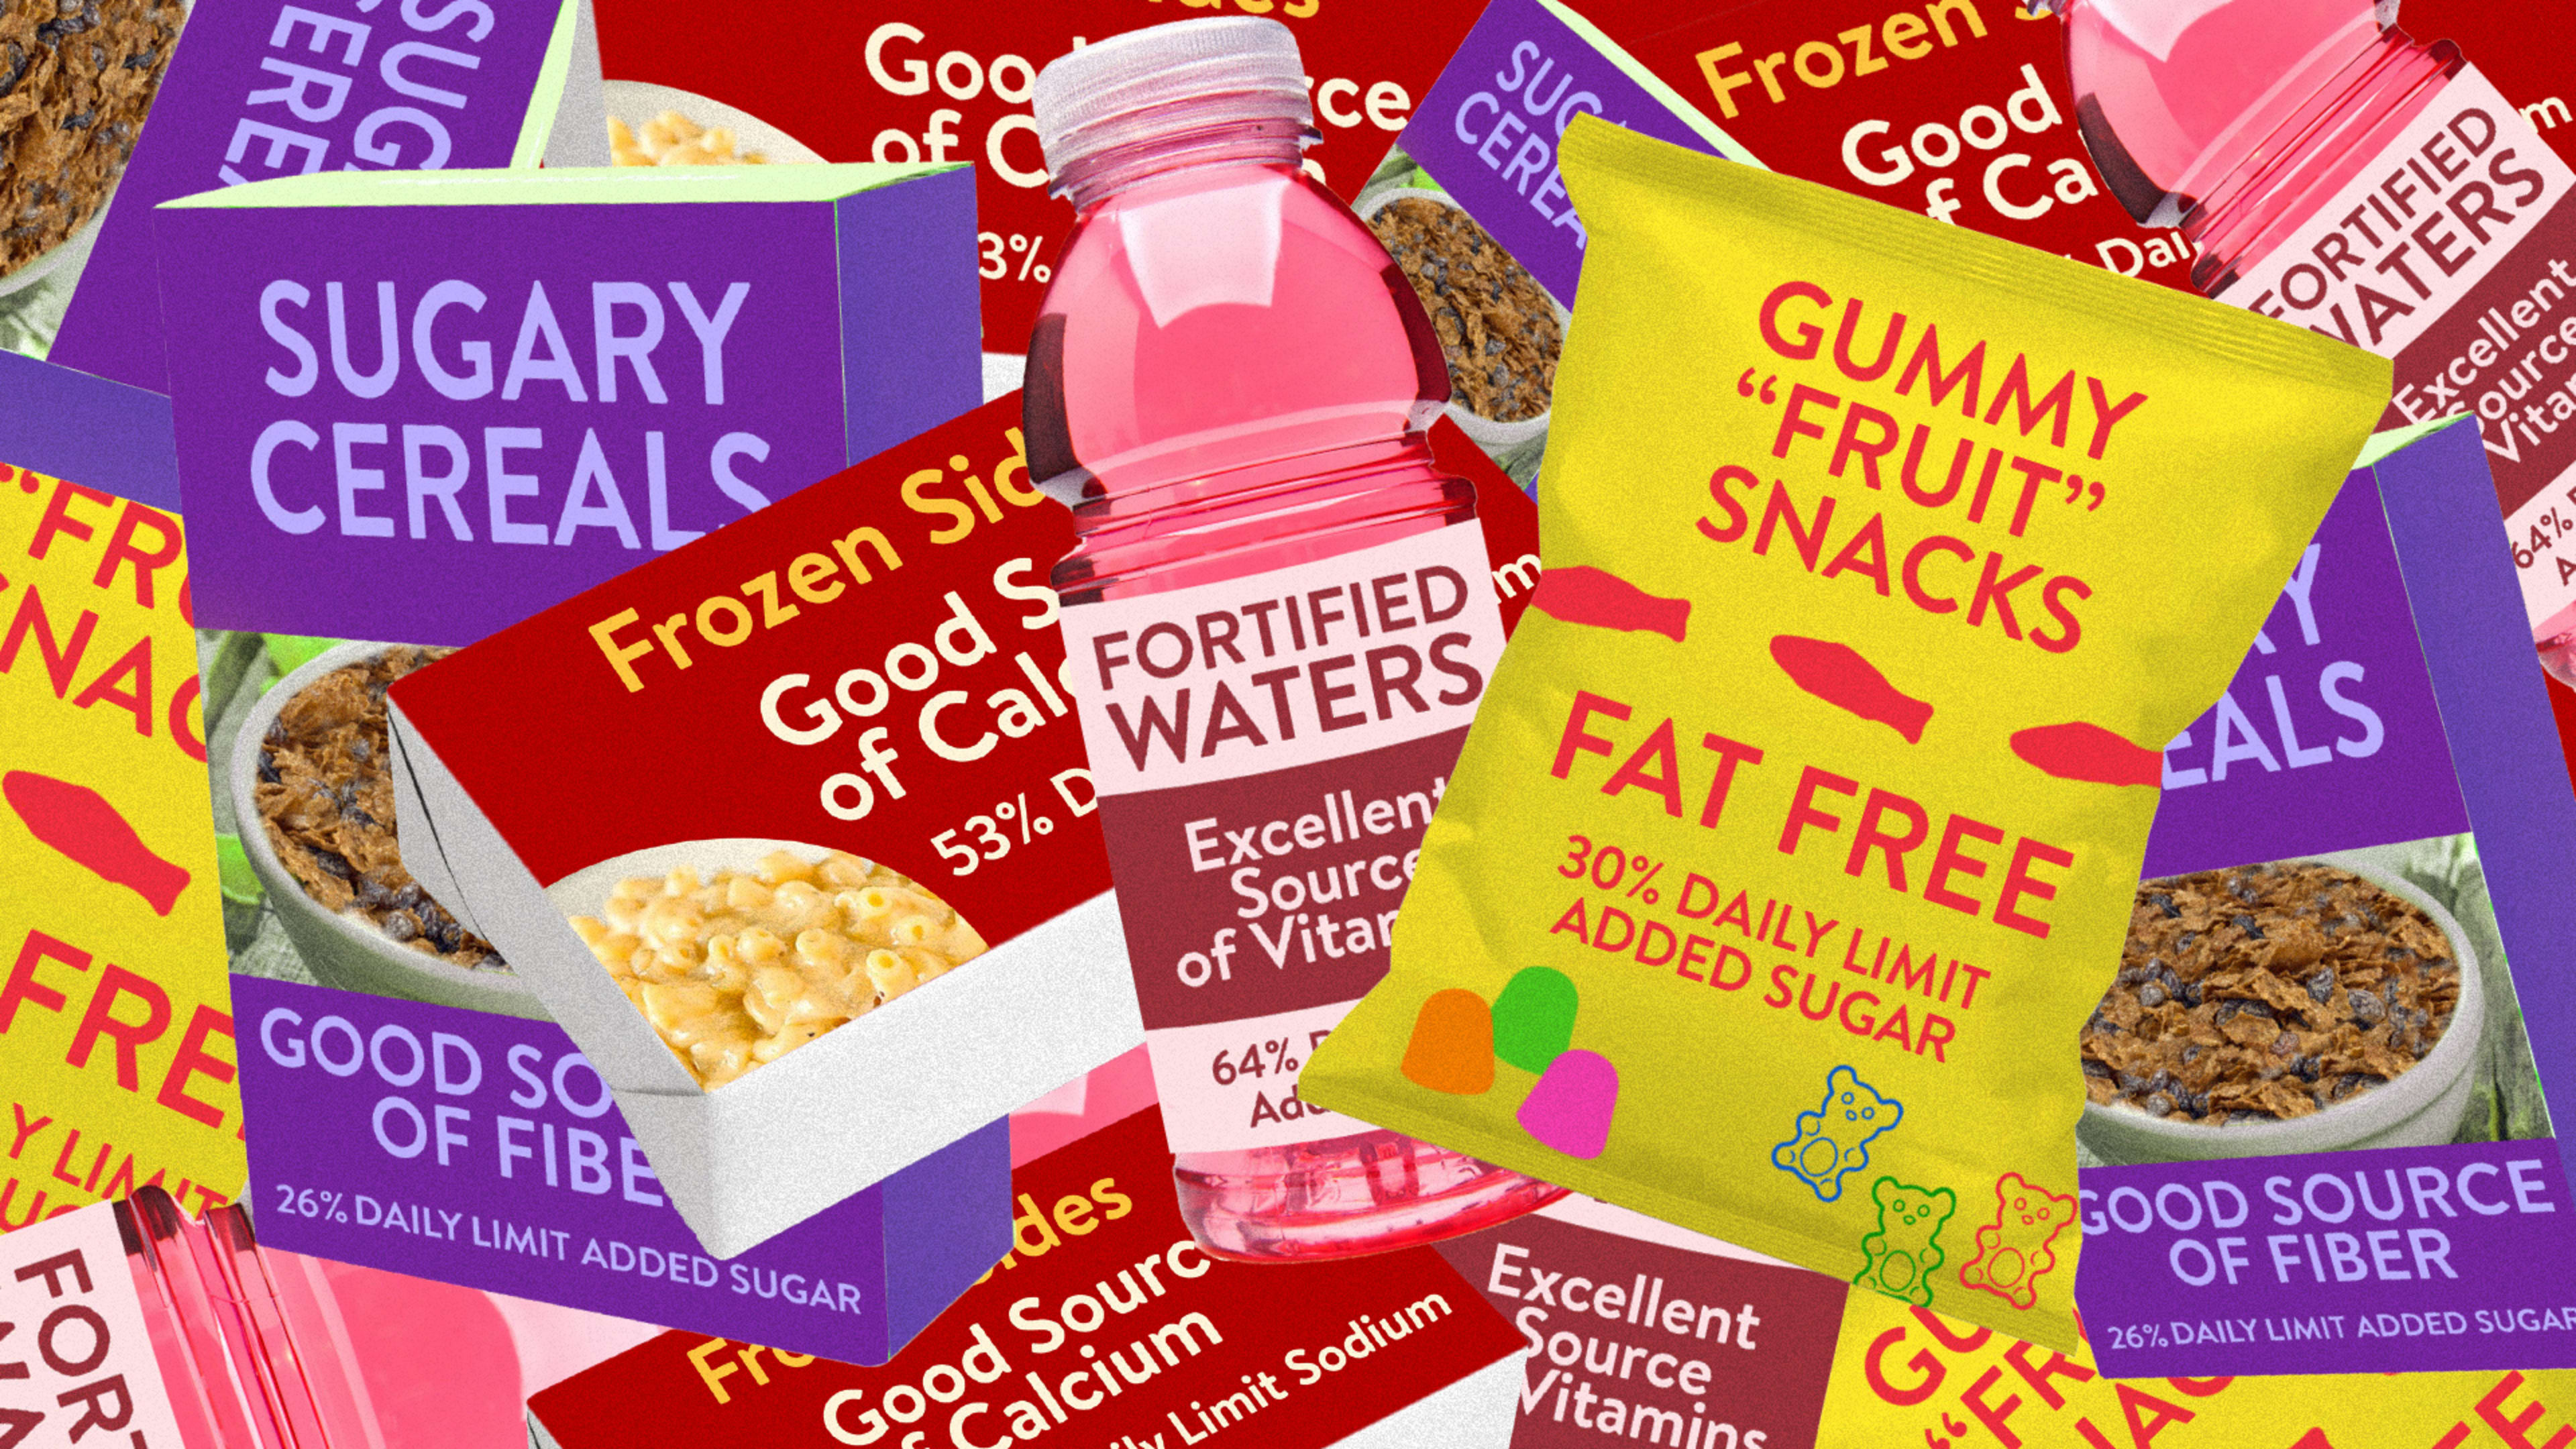 This petition asks the FDA to stop unhealthy foods from advertising their one healthy ingredient